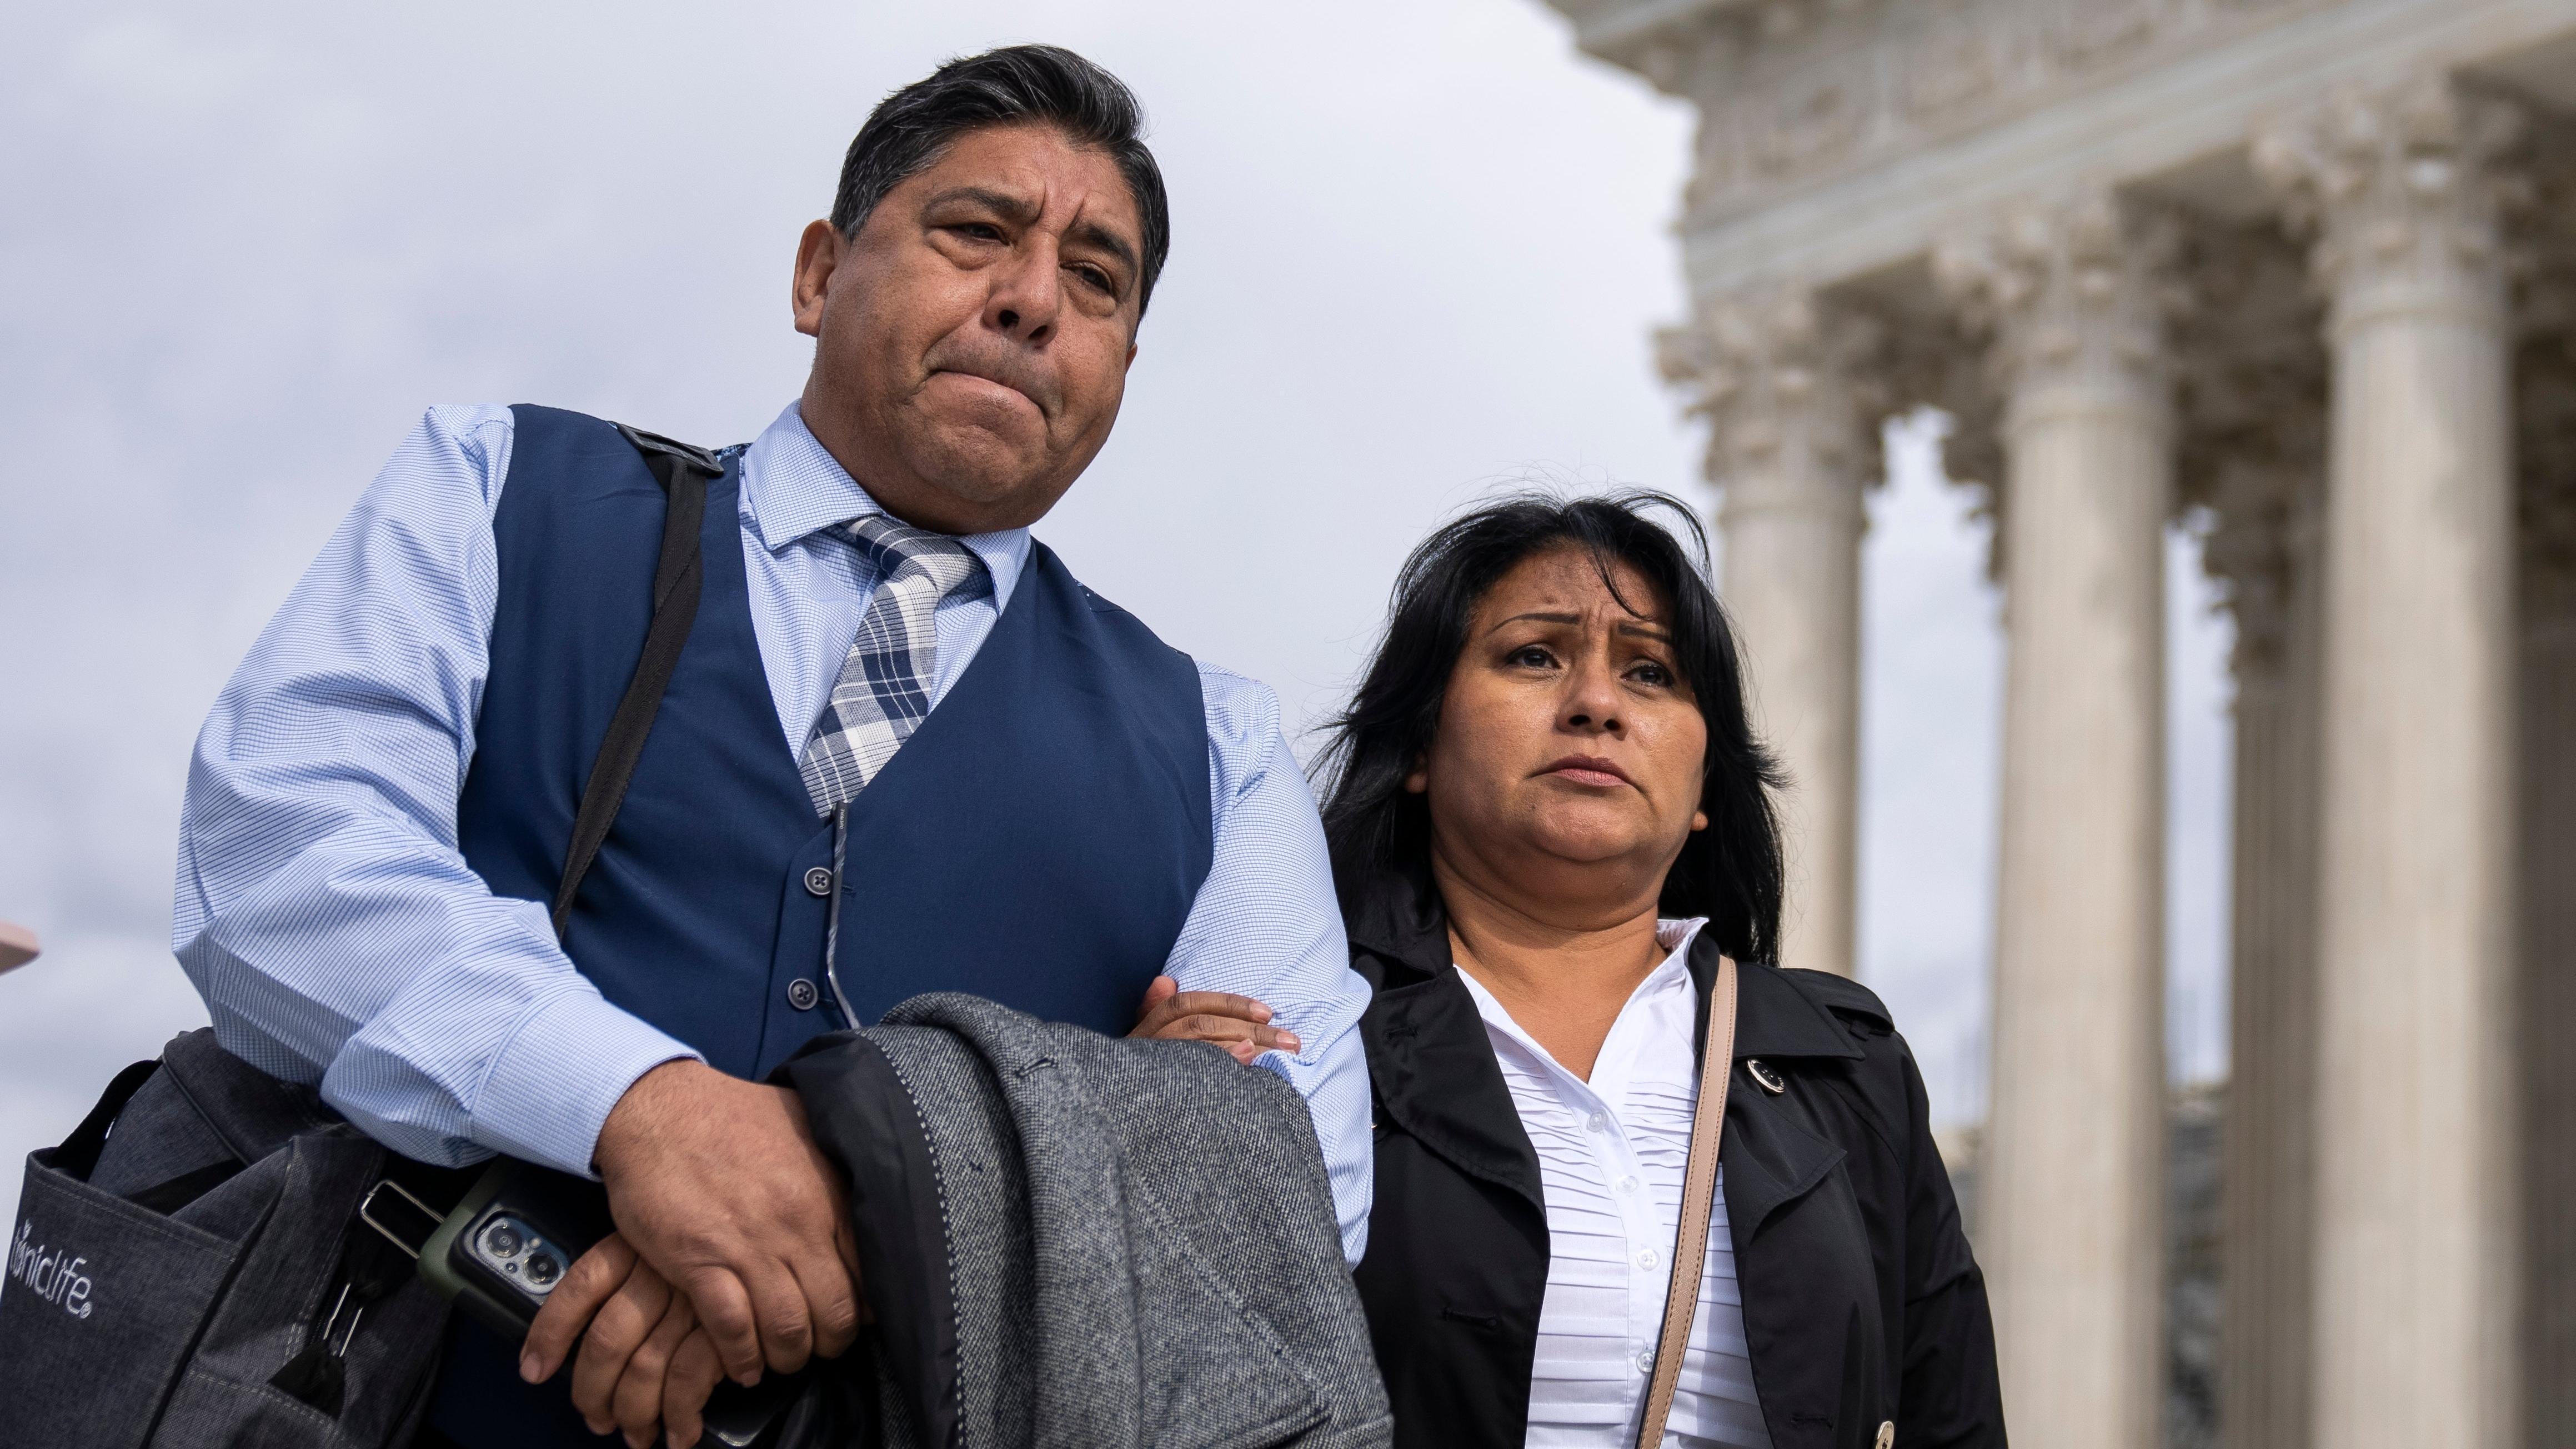  Jose Hernandez and Beatriz Gonzalez, stepfather and mother of Nohemi Gonzalez, who died in a terrorist attack in Paris in 2015, arrive to speak to the press outside of the U.S. Supreme Court following oral arguments in Gonzalez v. Google February 21, 2023 (Photo: Drew Angerer, Getty Images)